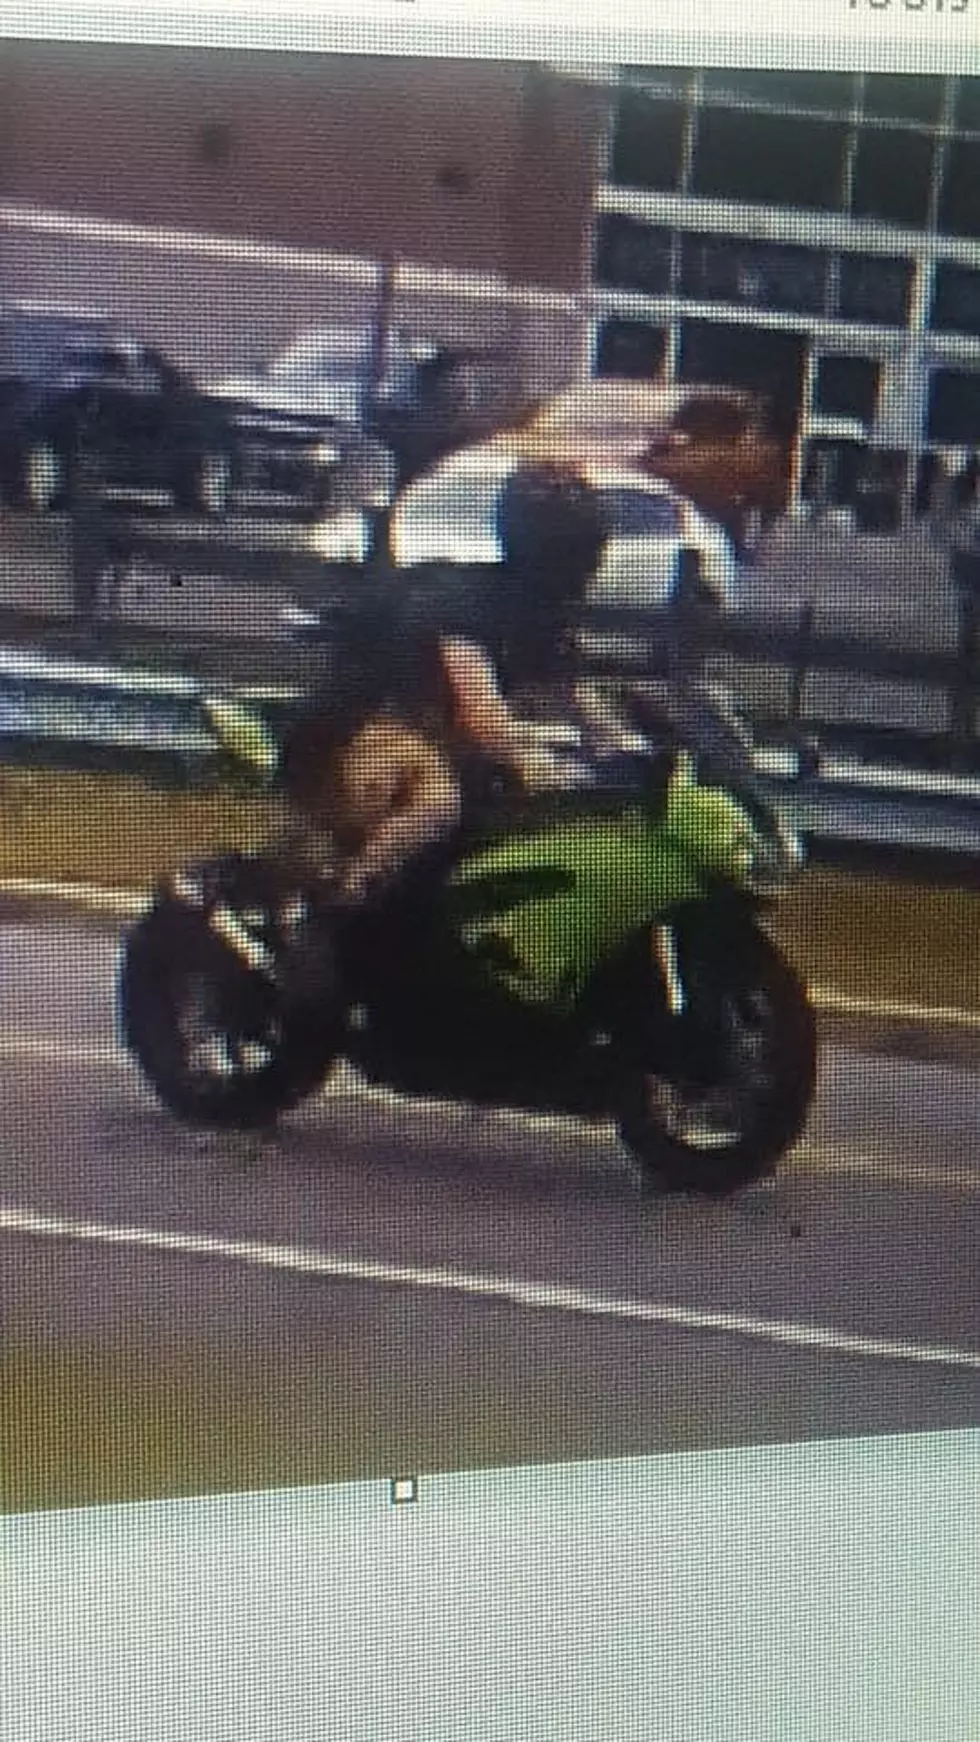 Howell Police need your help identifying motorcyclist who fled patrol cars